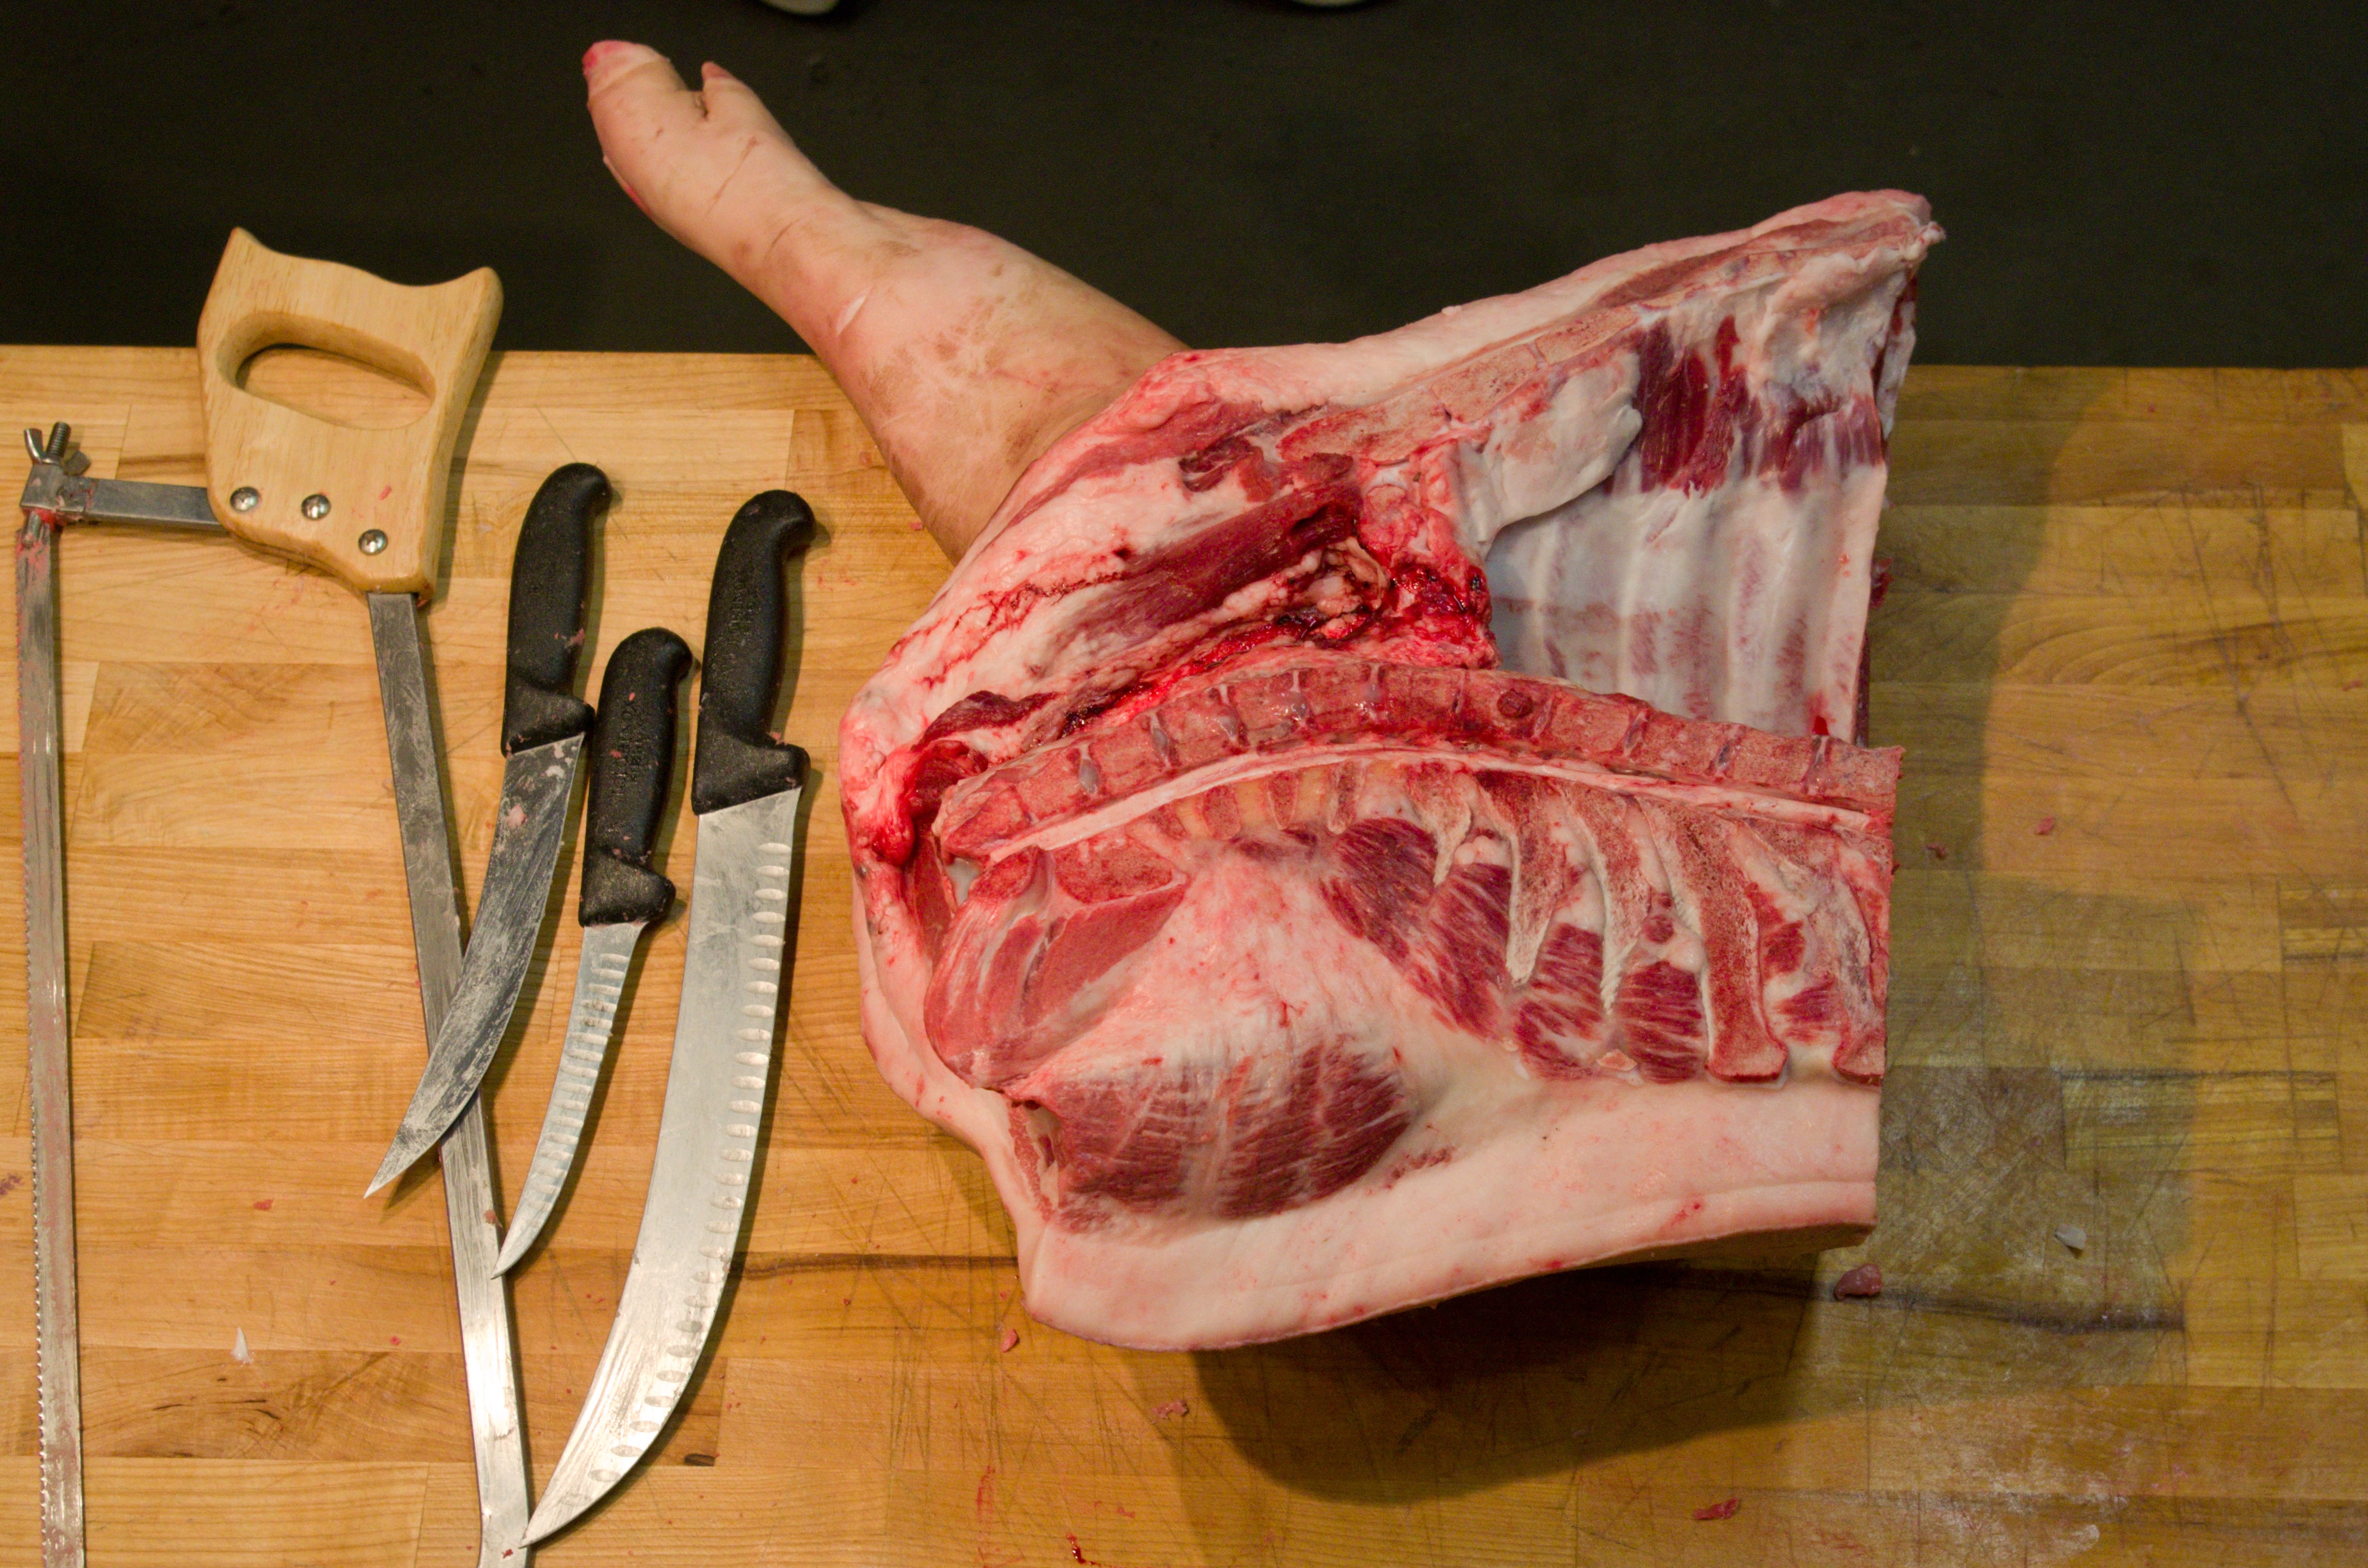 Photo by Cindy Kunst for The Ethical Meat Handbook